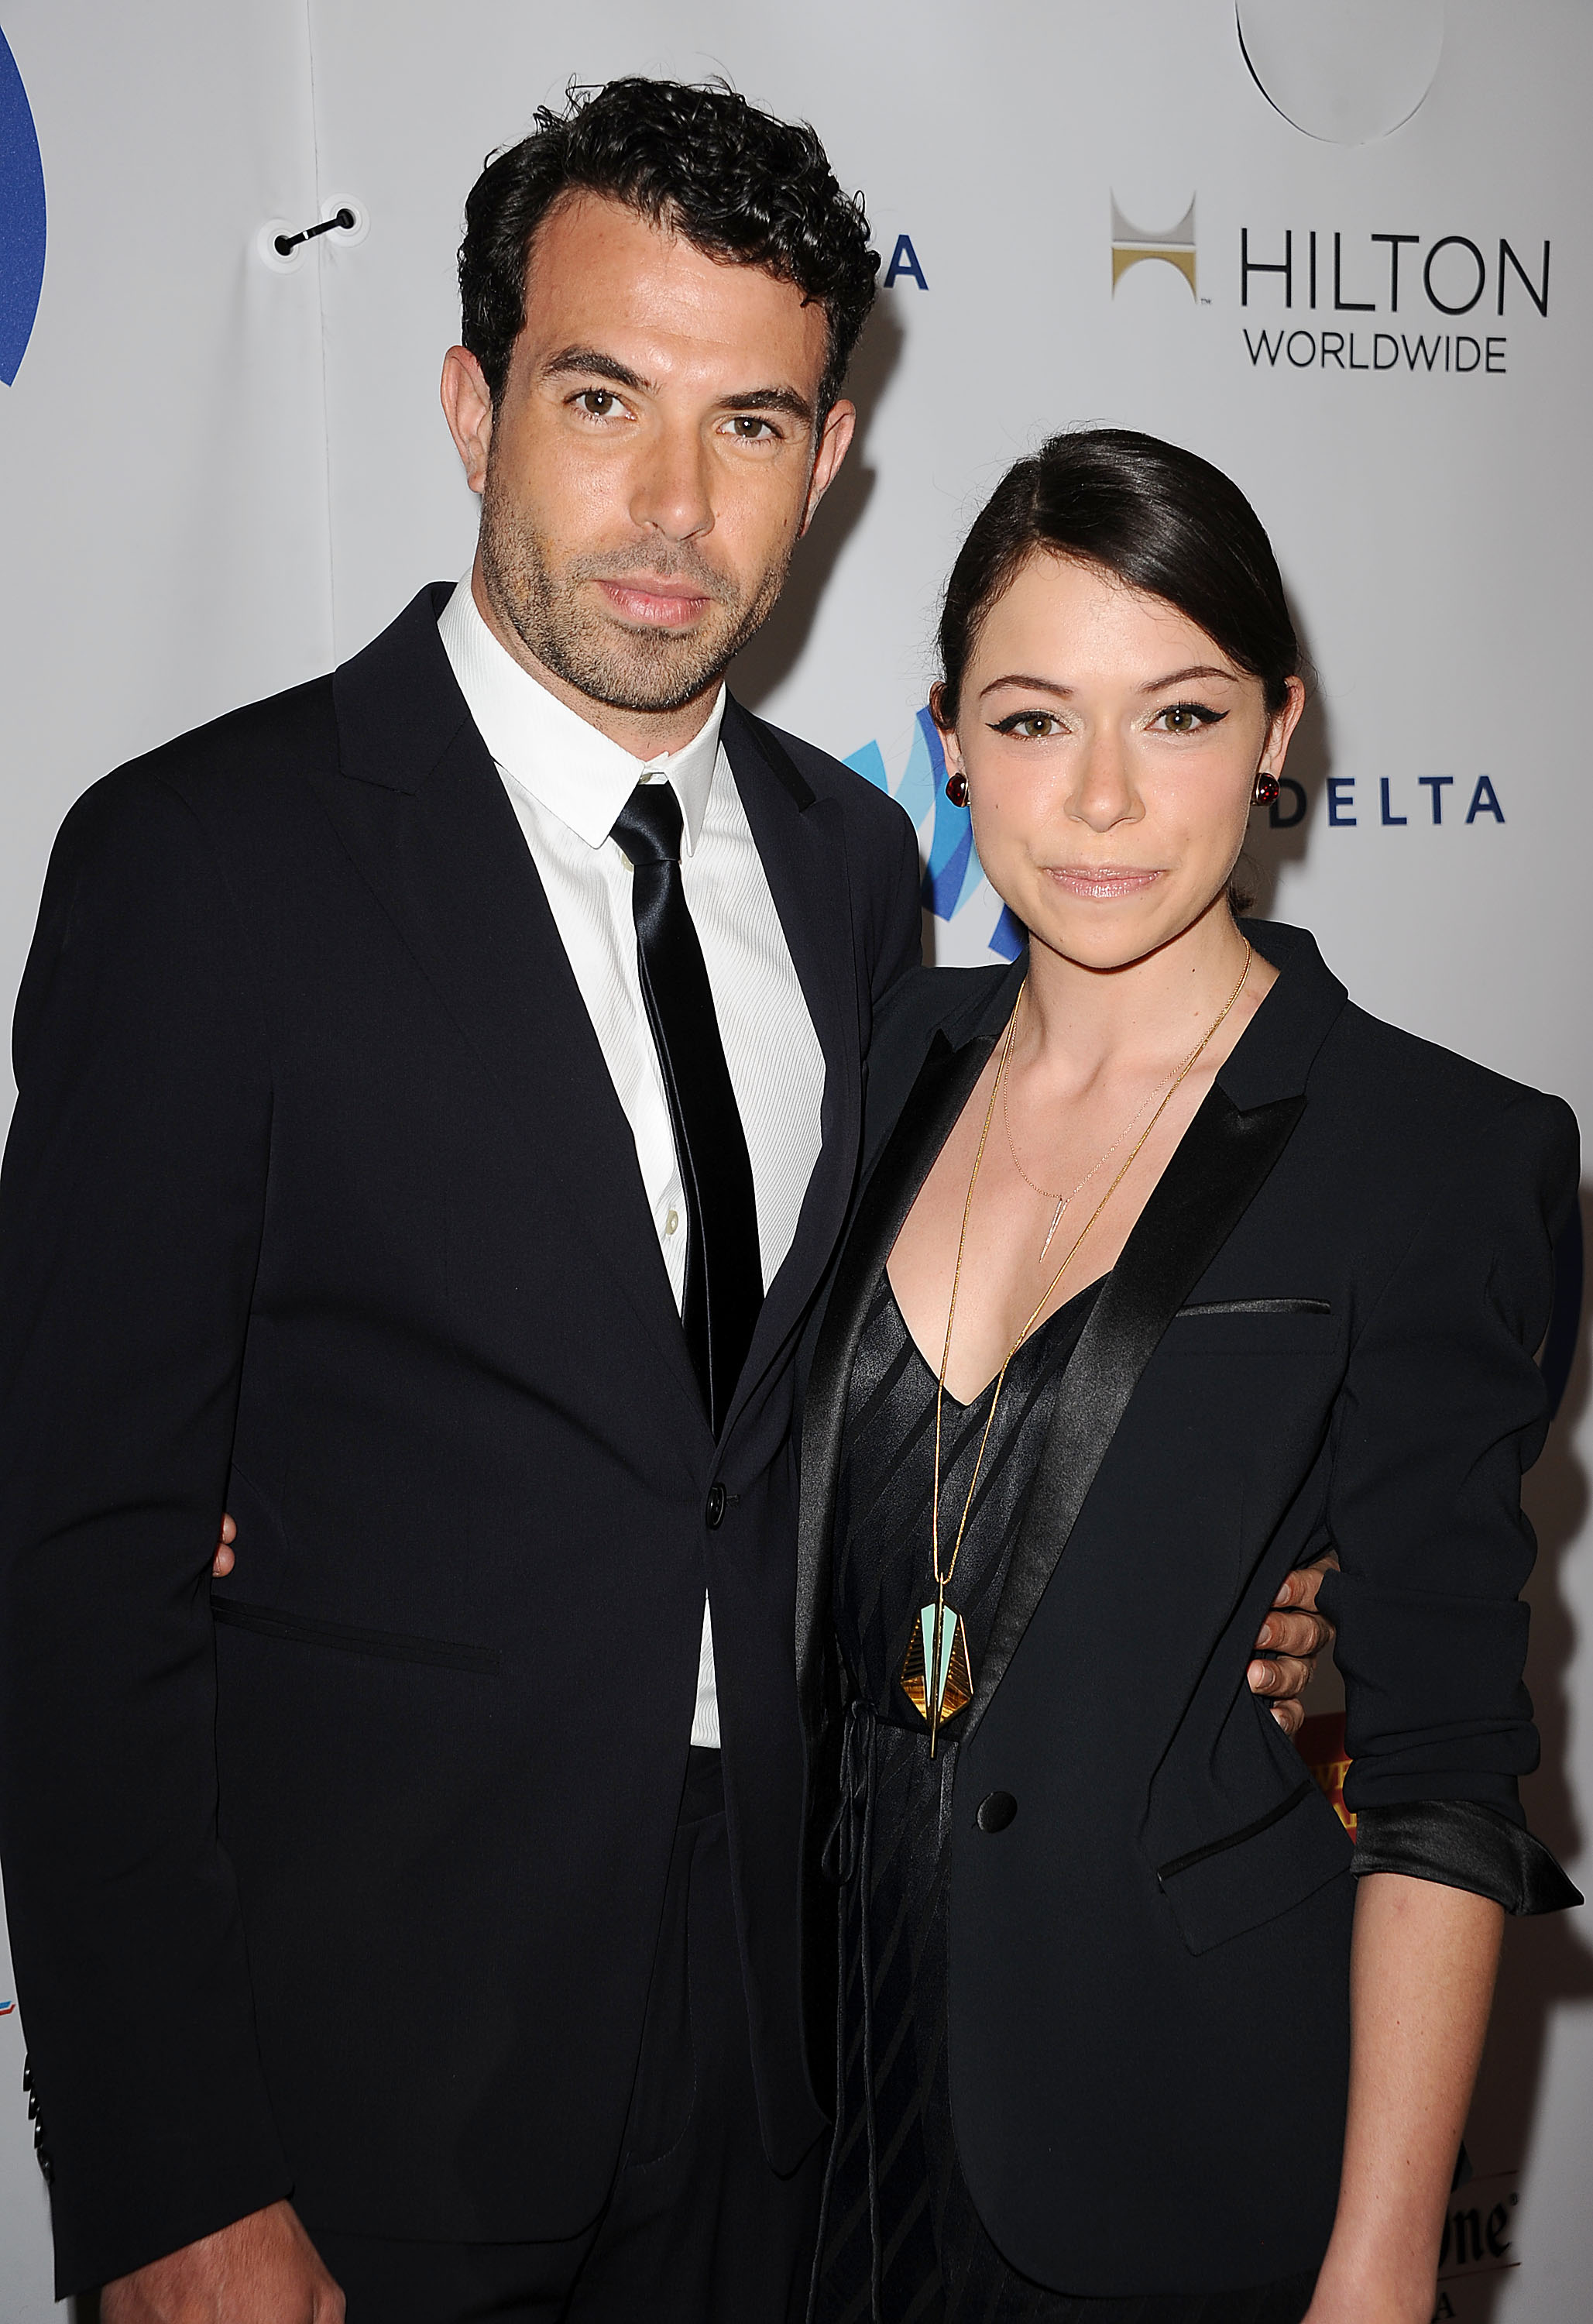 Tom Cullen and Tatiana Maslany attend the 25th annual GLAAD Media Awards at The Beverly Hilton Hotel on April 12, 2014, in Beverly Hills, California. | Source: Getty Images